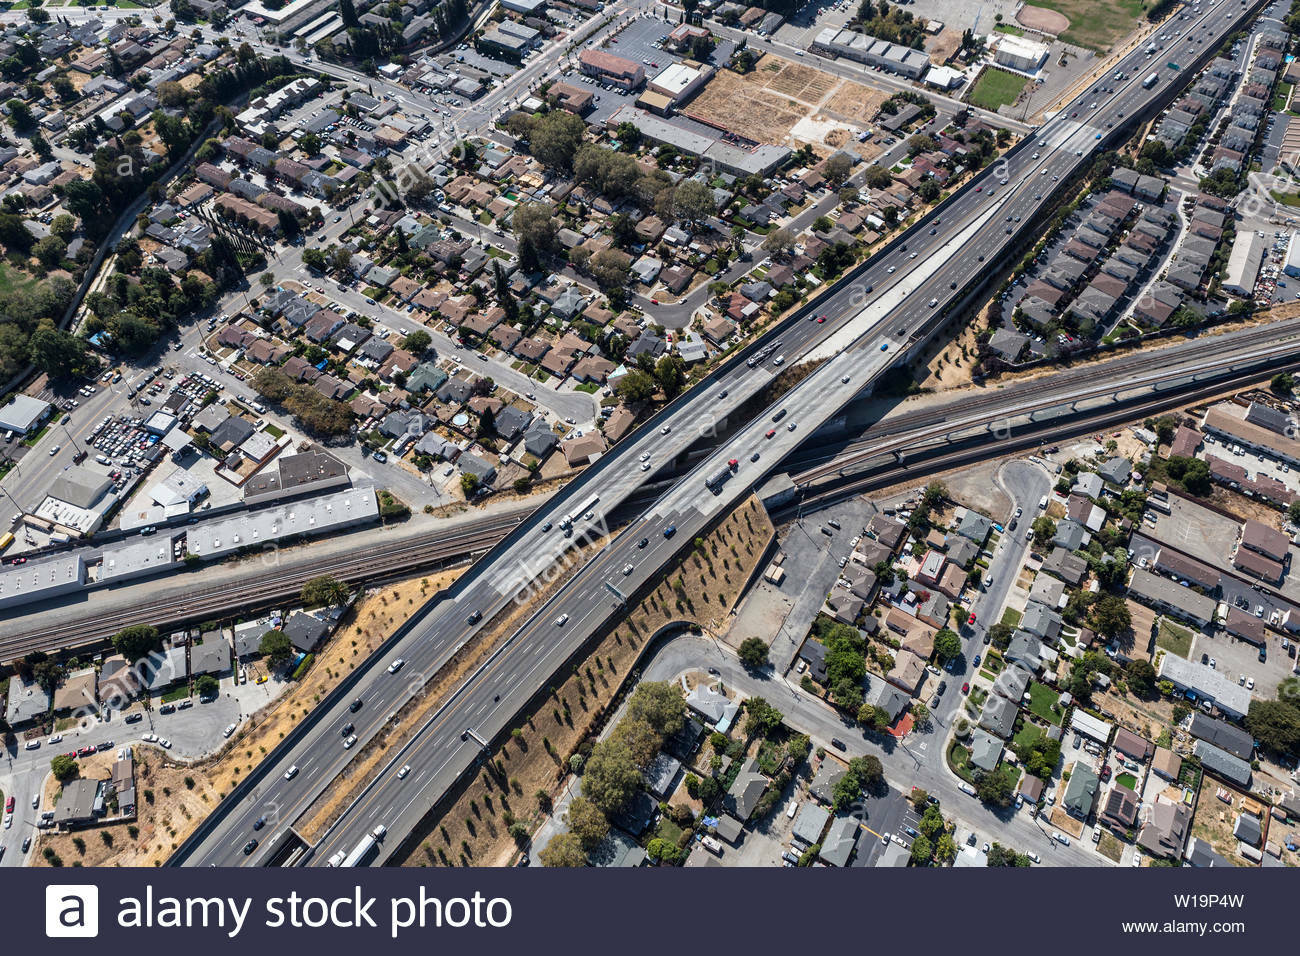 Aerial view of streets buildings and traffic along the 238 freeway railroad overpass near oakland california W19 P4 W